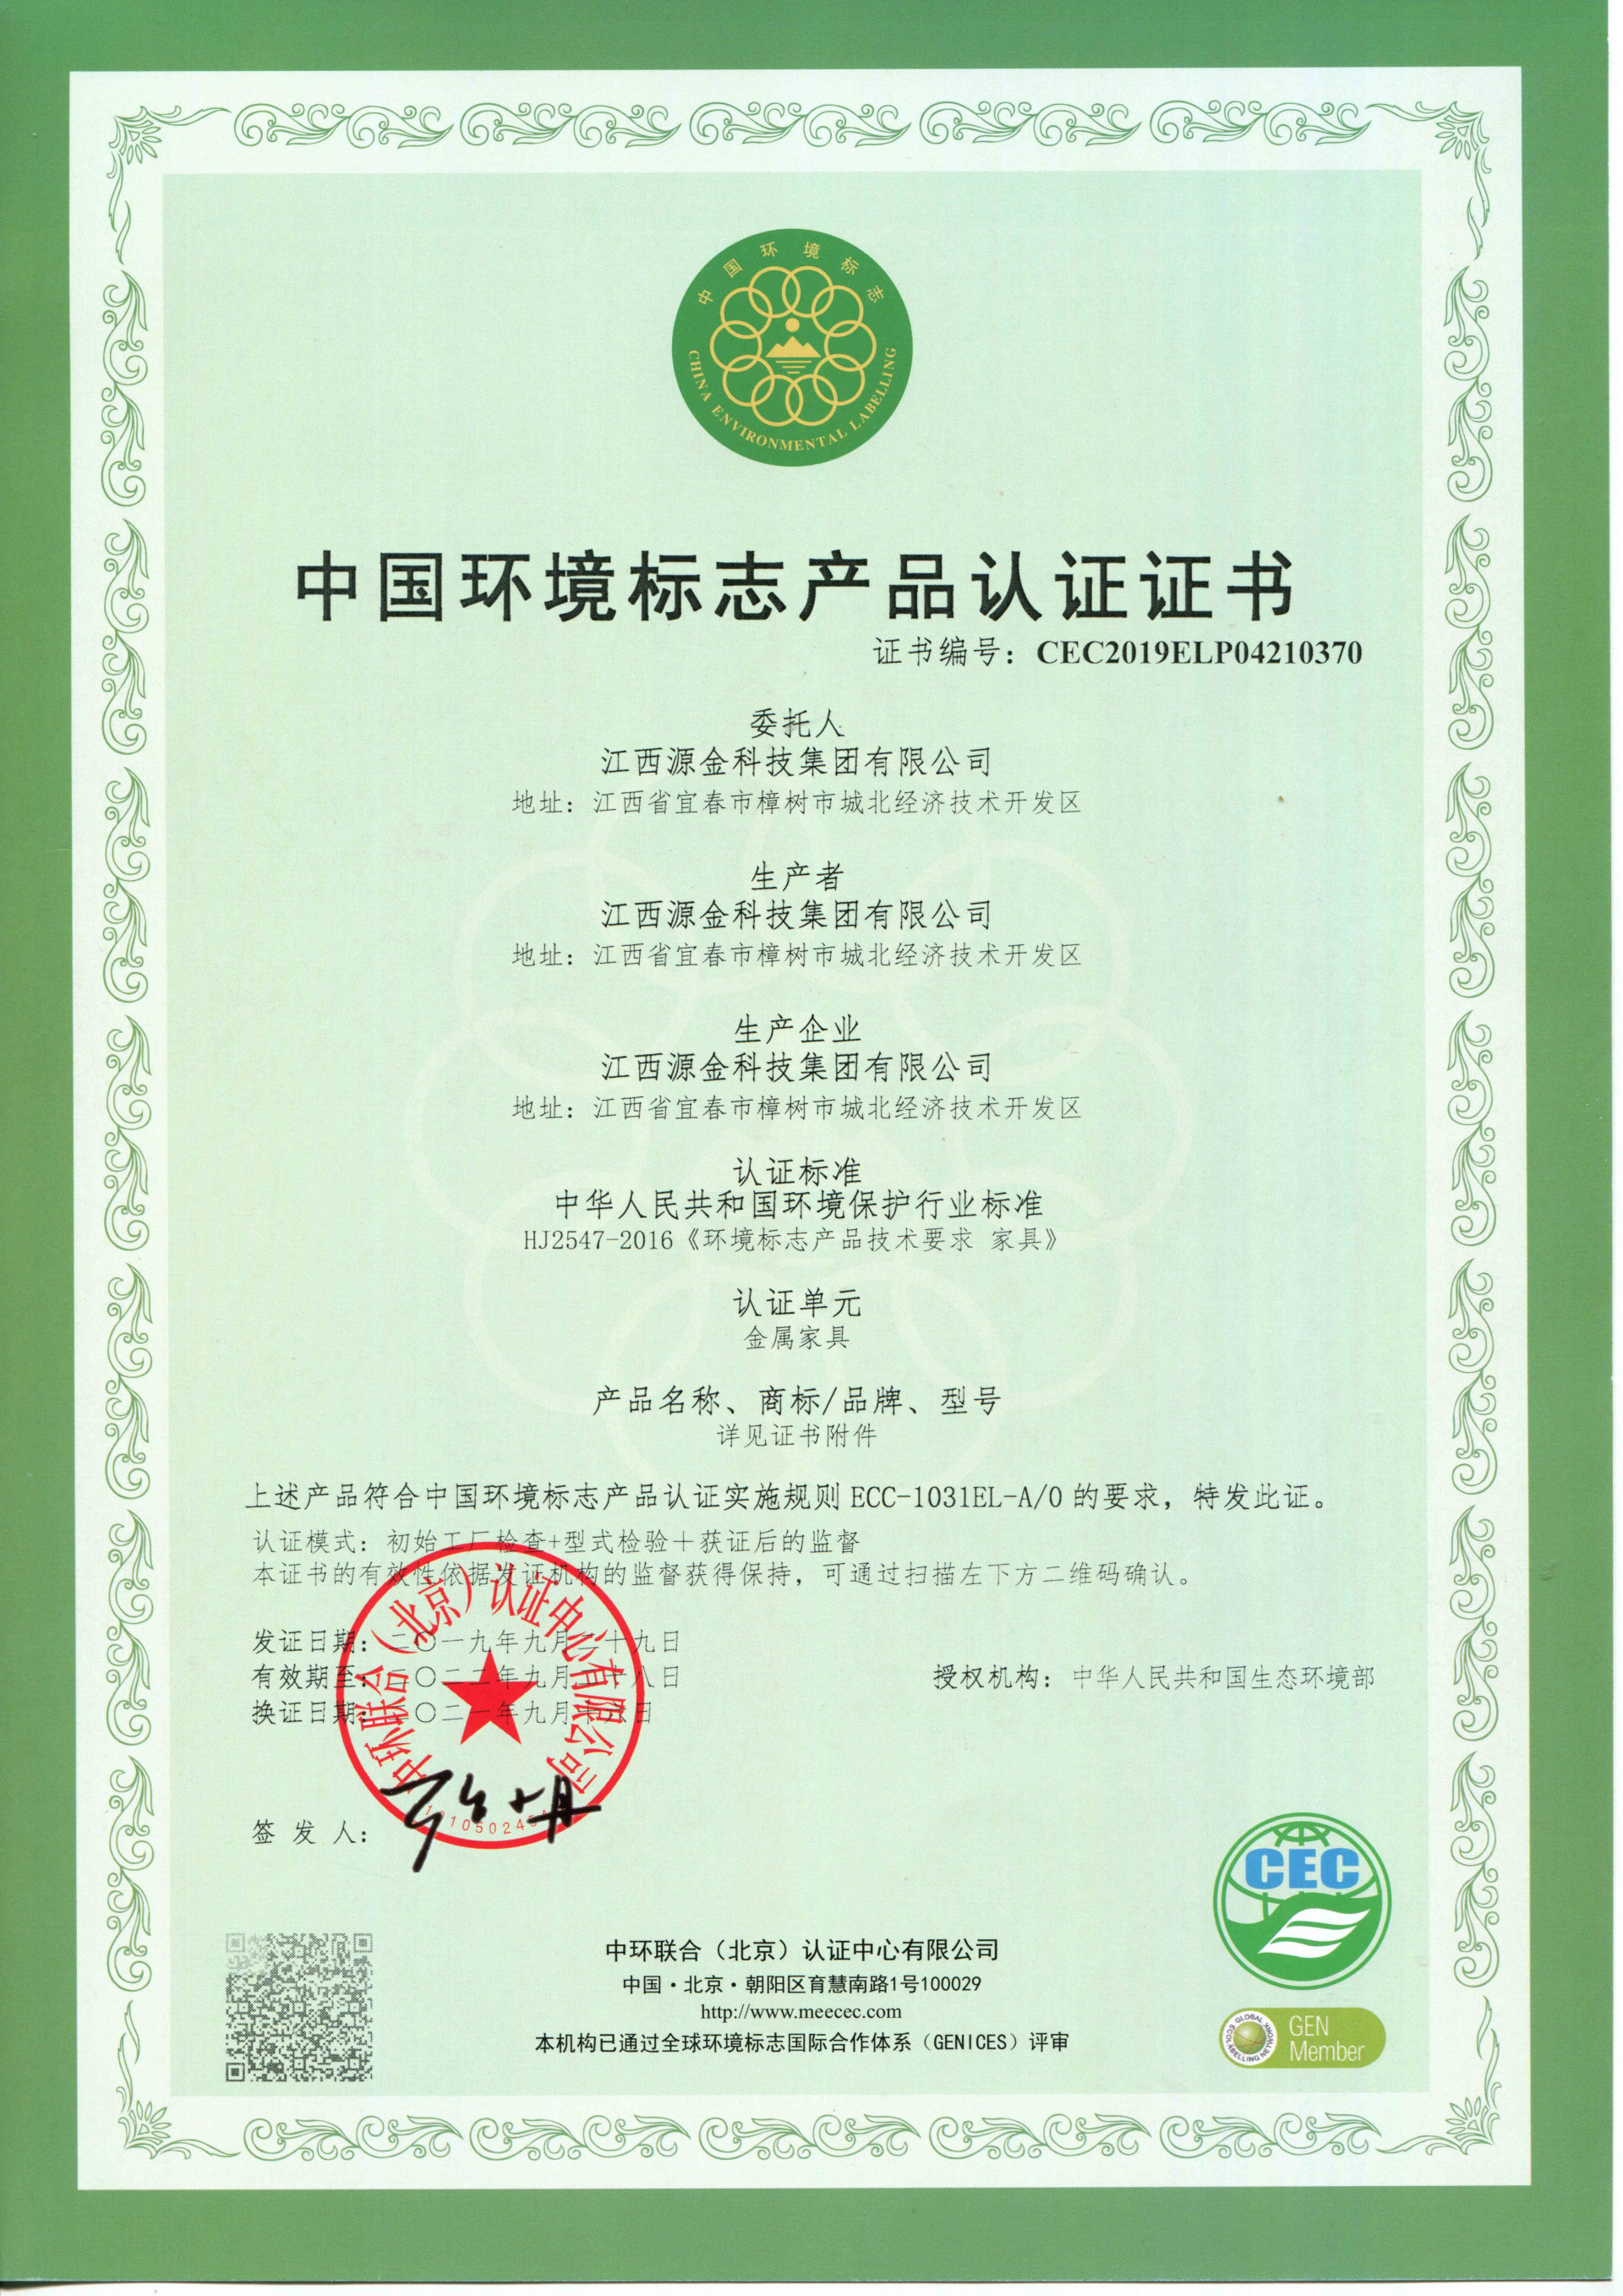 China Environmental Labeling Product Certificate